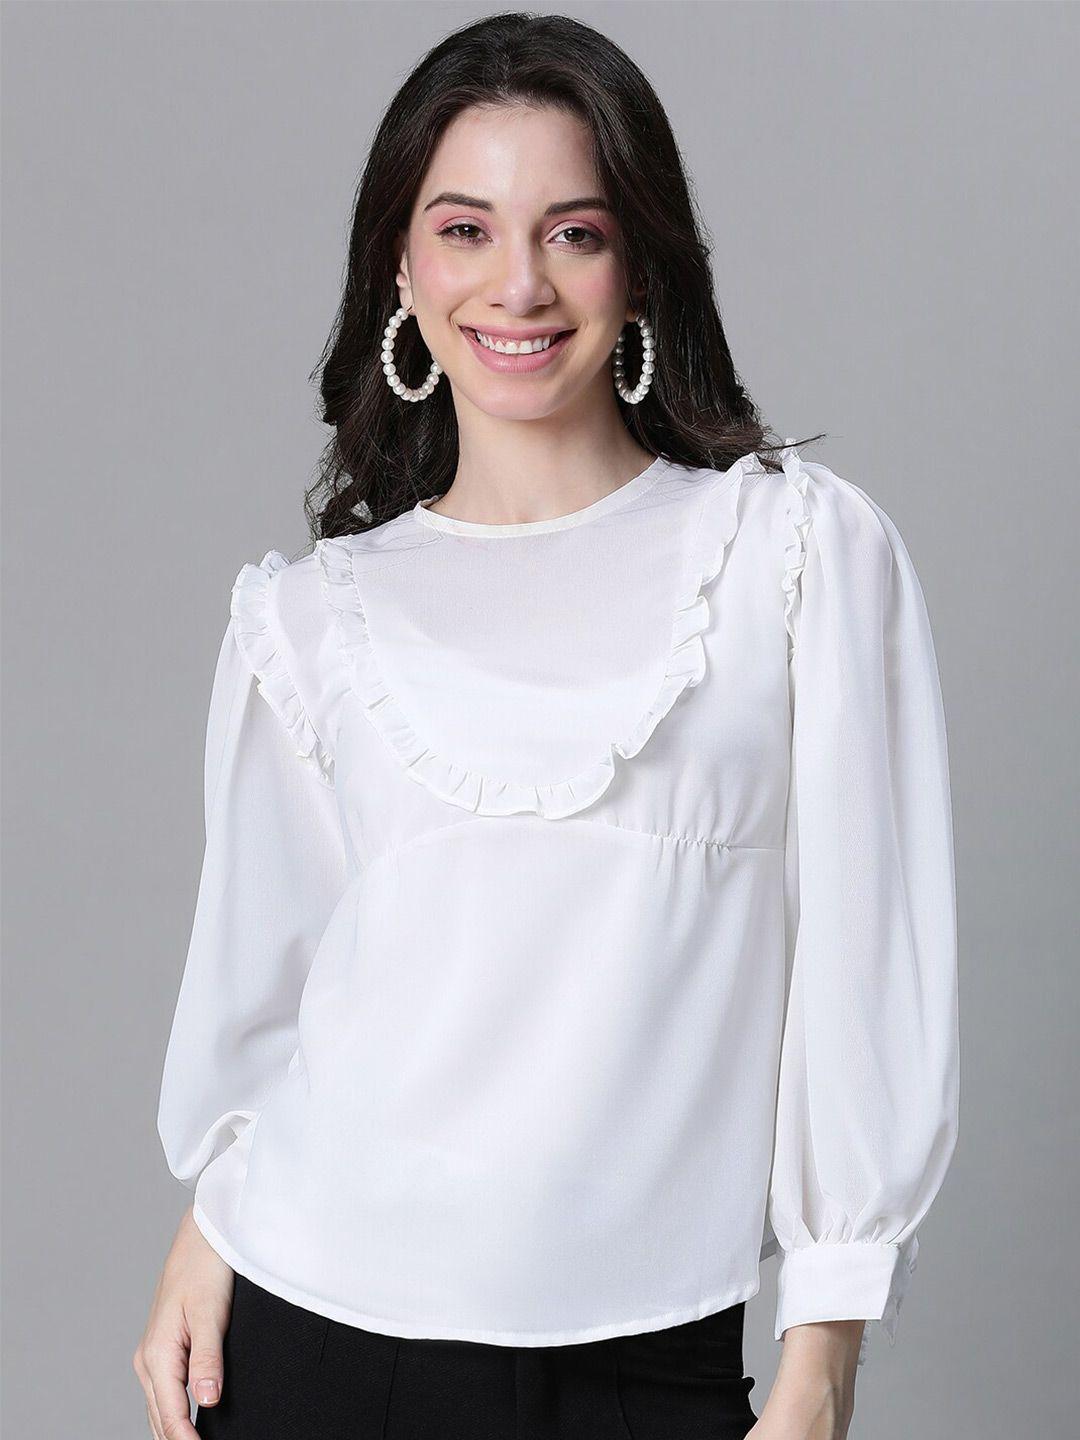 oxolloxo-round-neck-ruffled-cuffed-sleeves-top